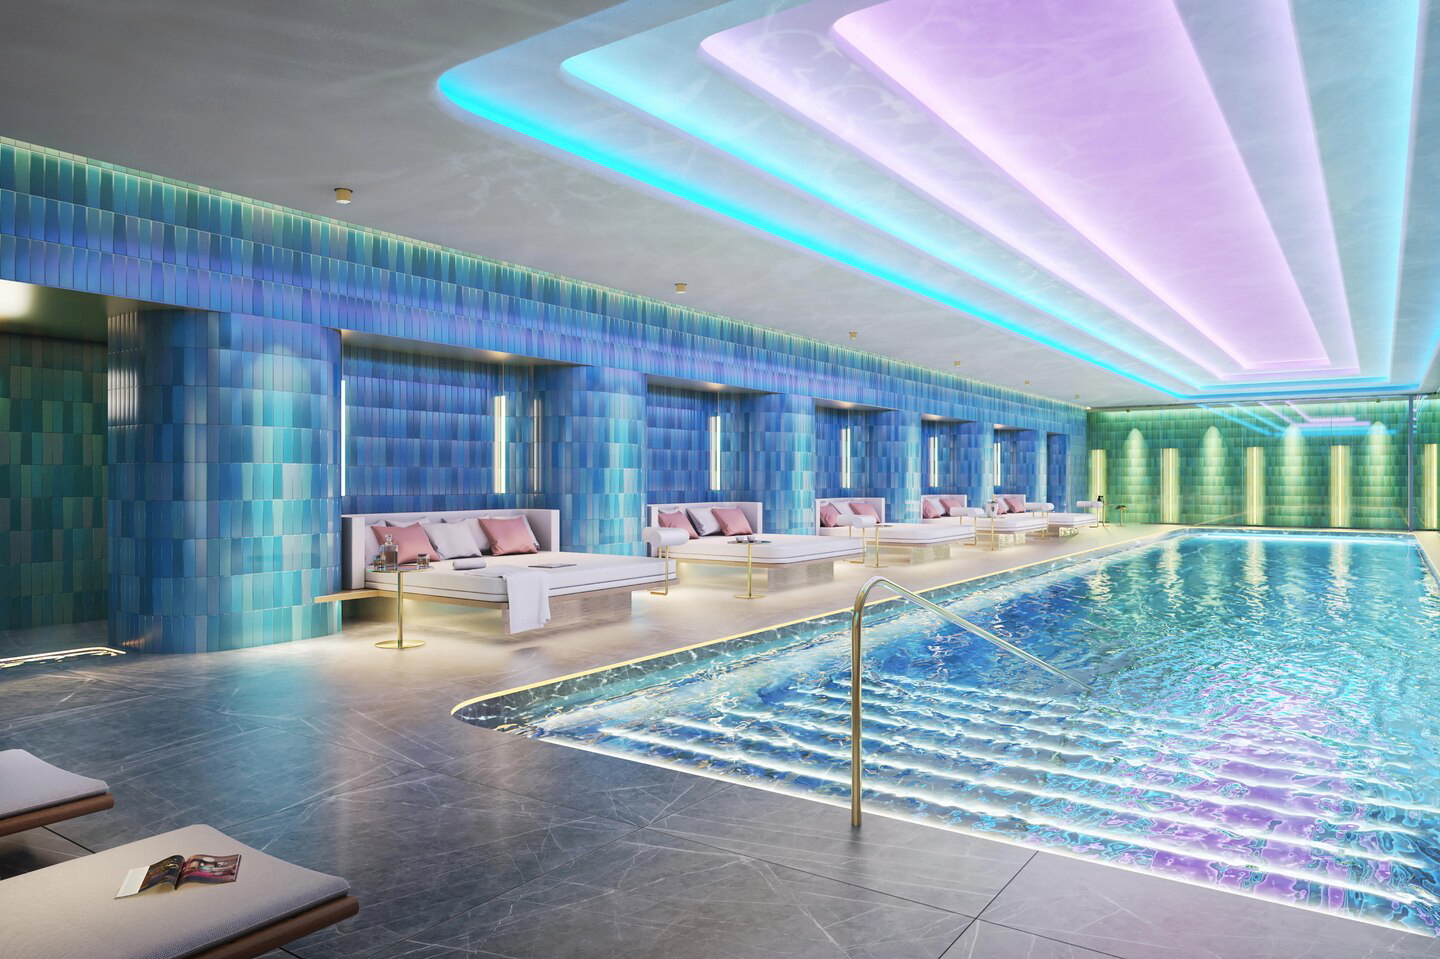 Indoor pool at the W Osaka. Click to enlarge.